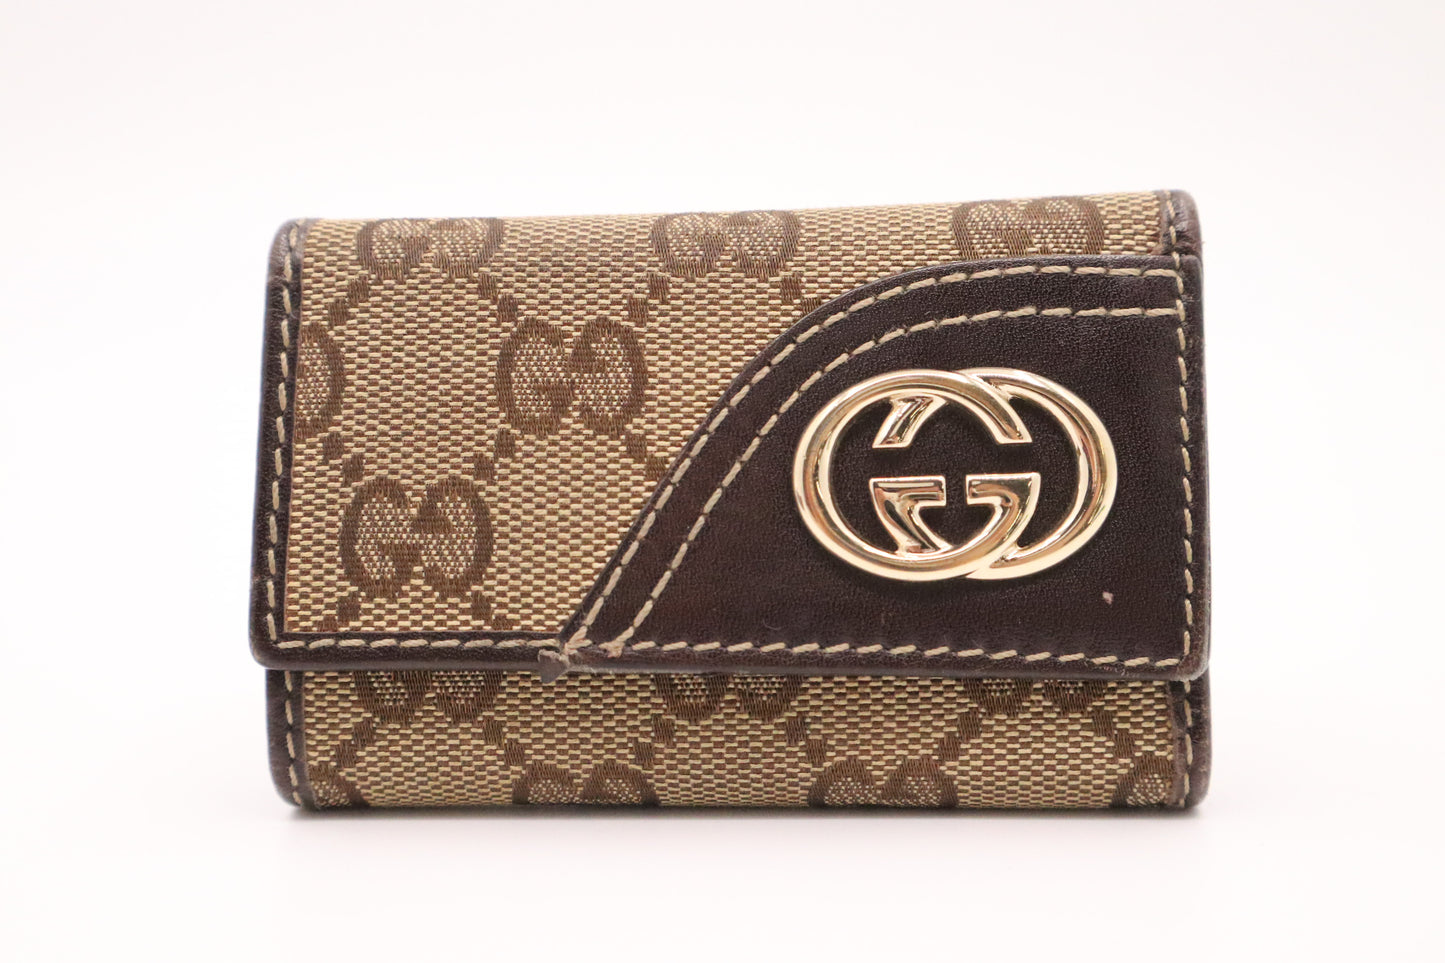 Gucci 4 Key Case in GG Canvas & Brown Leather